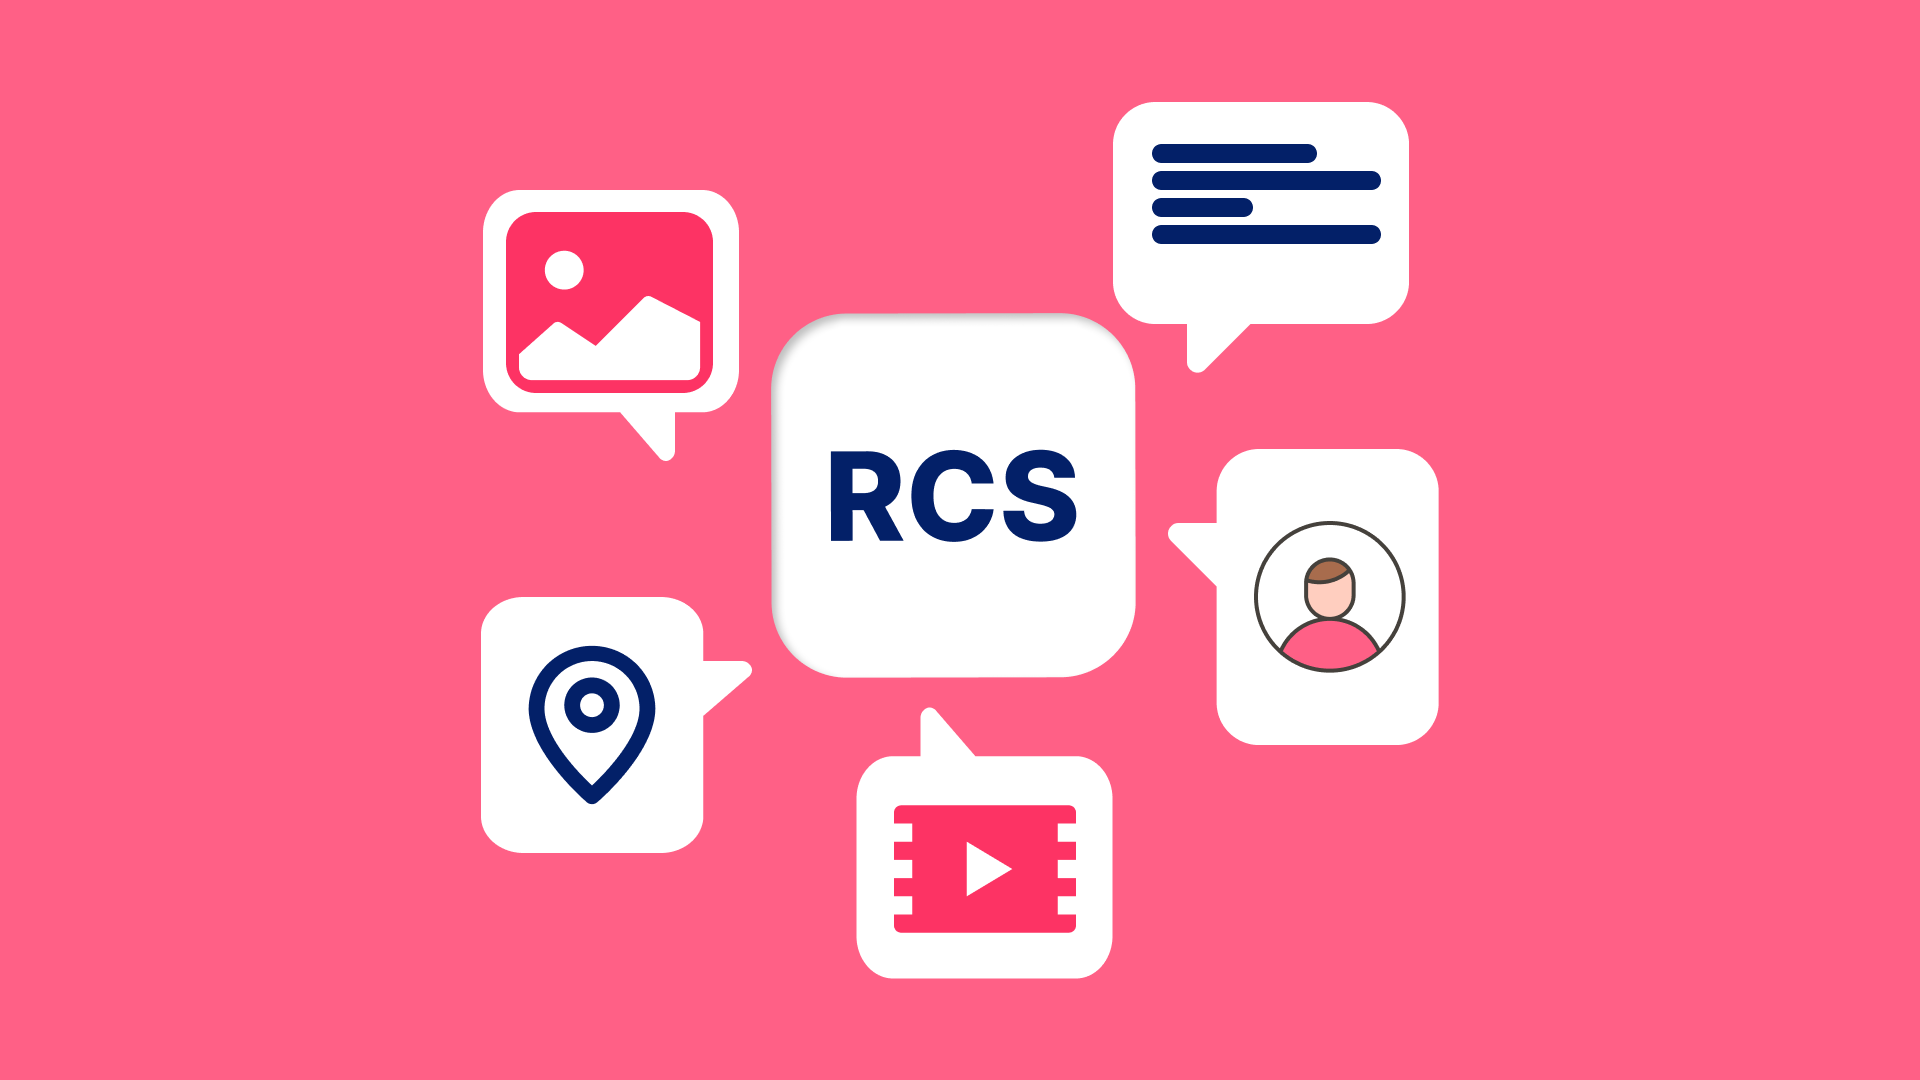 The ultimate guide on RCS messaging by Umnico